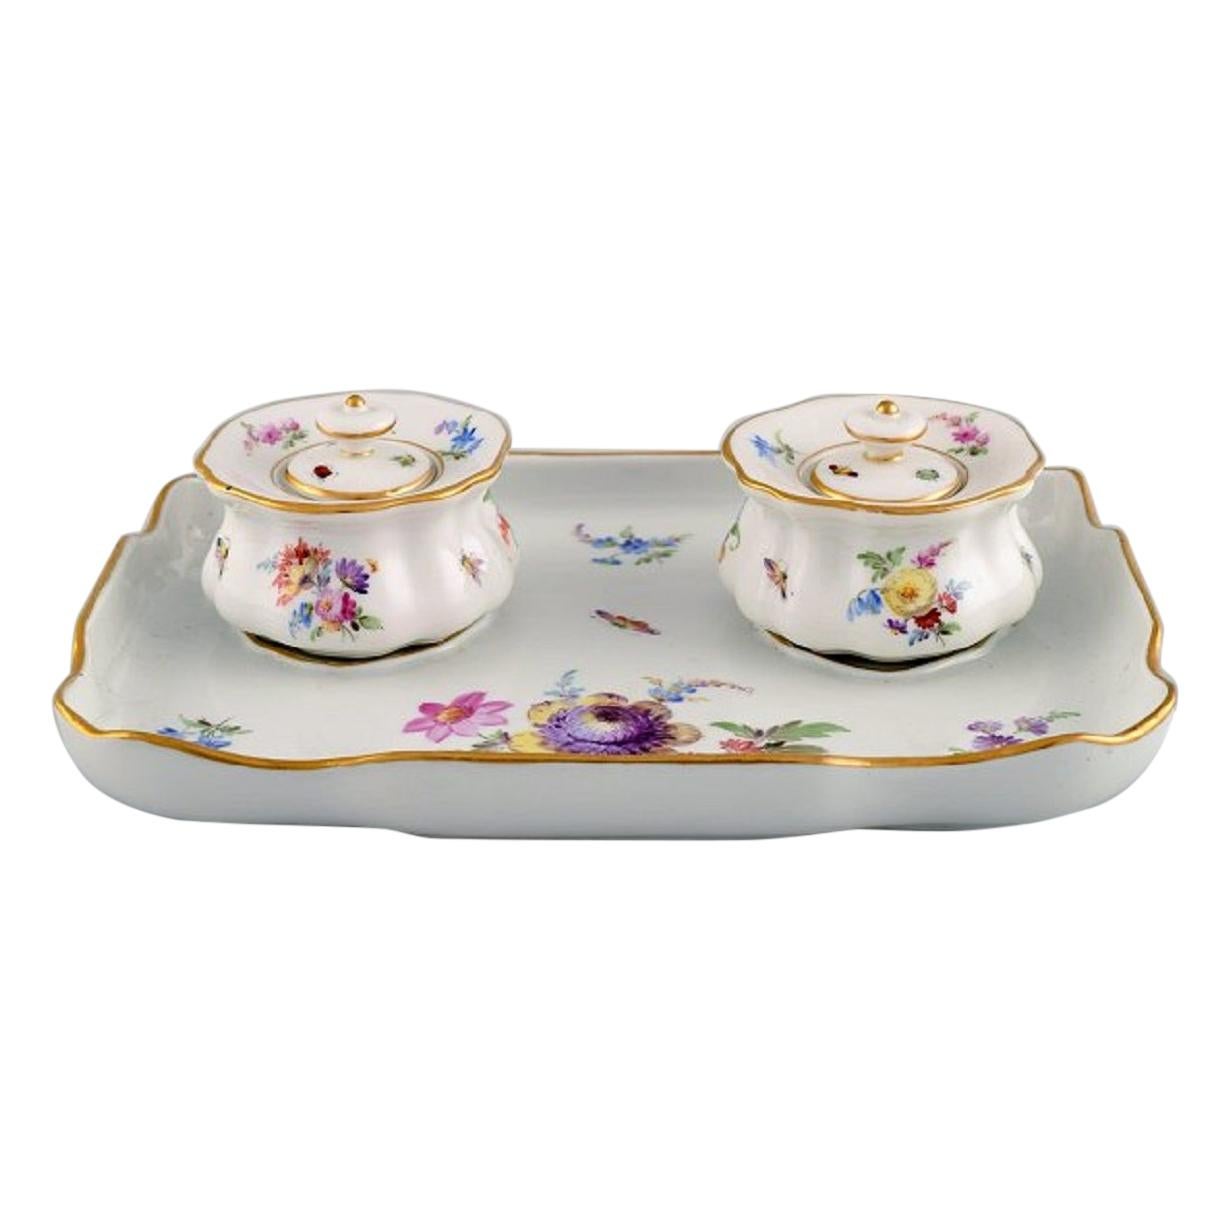 Antique Meissen inkwell set in hand-painted porcelain with floral motifs. 19th C